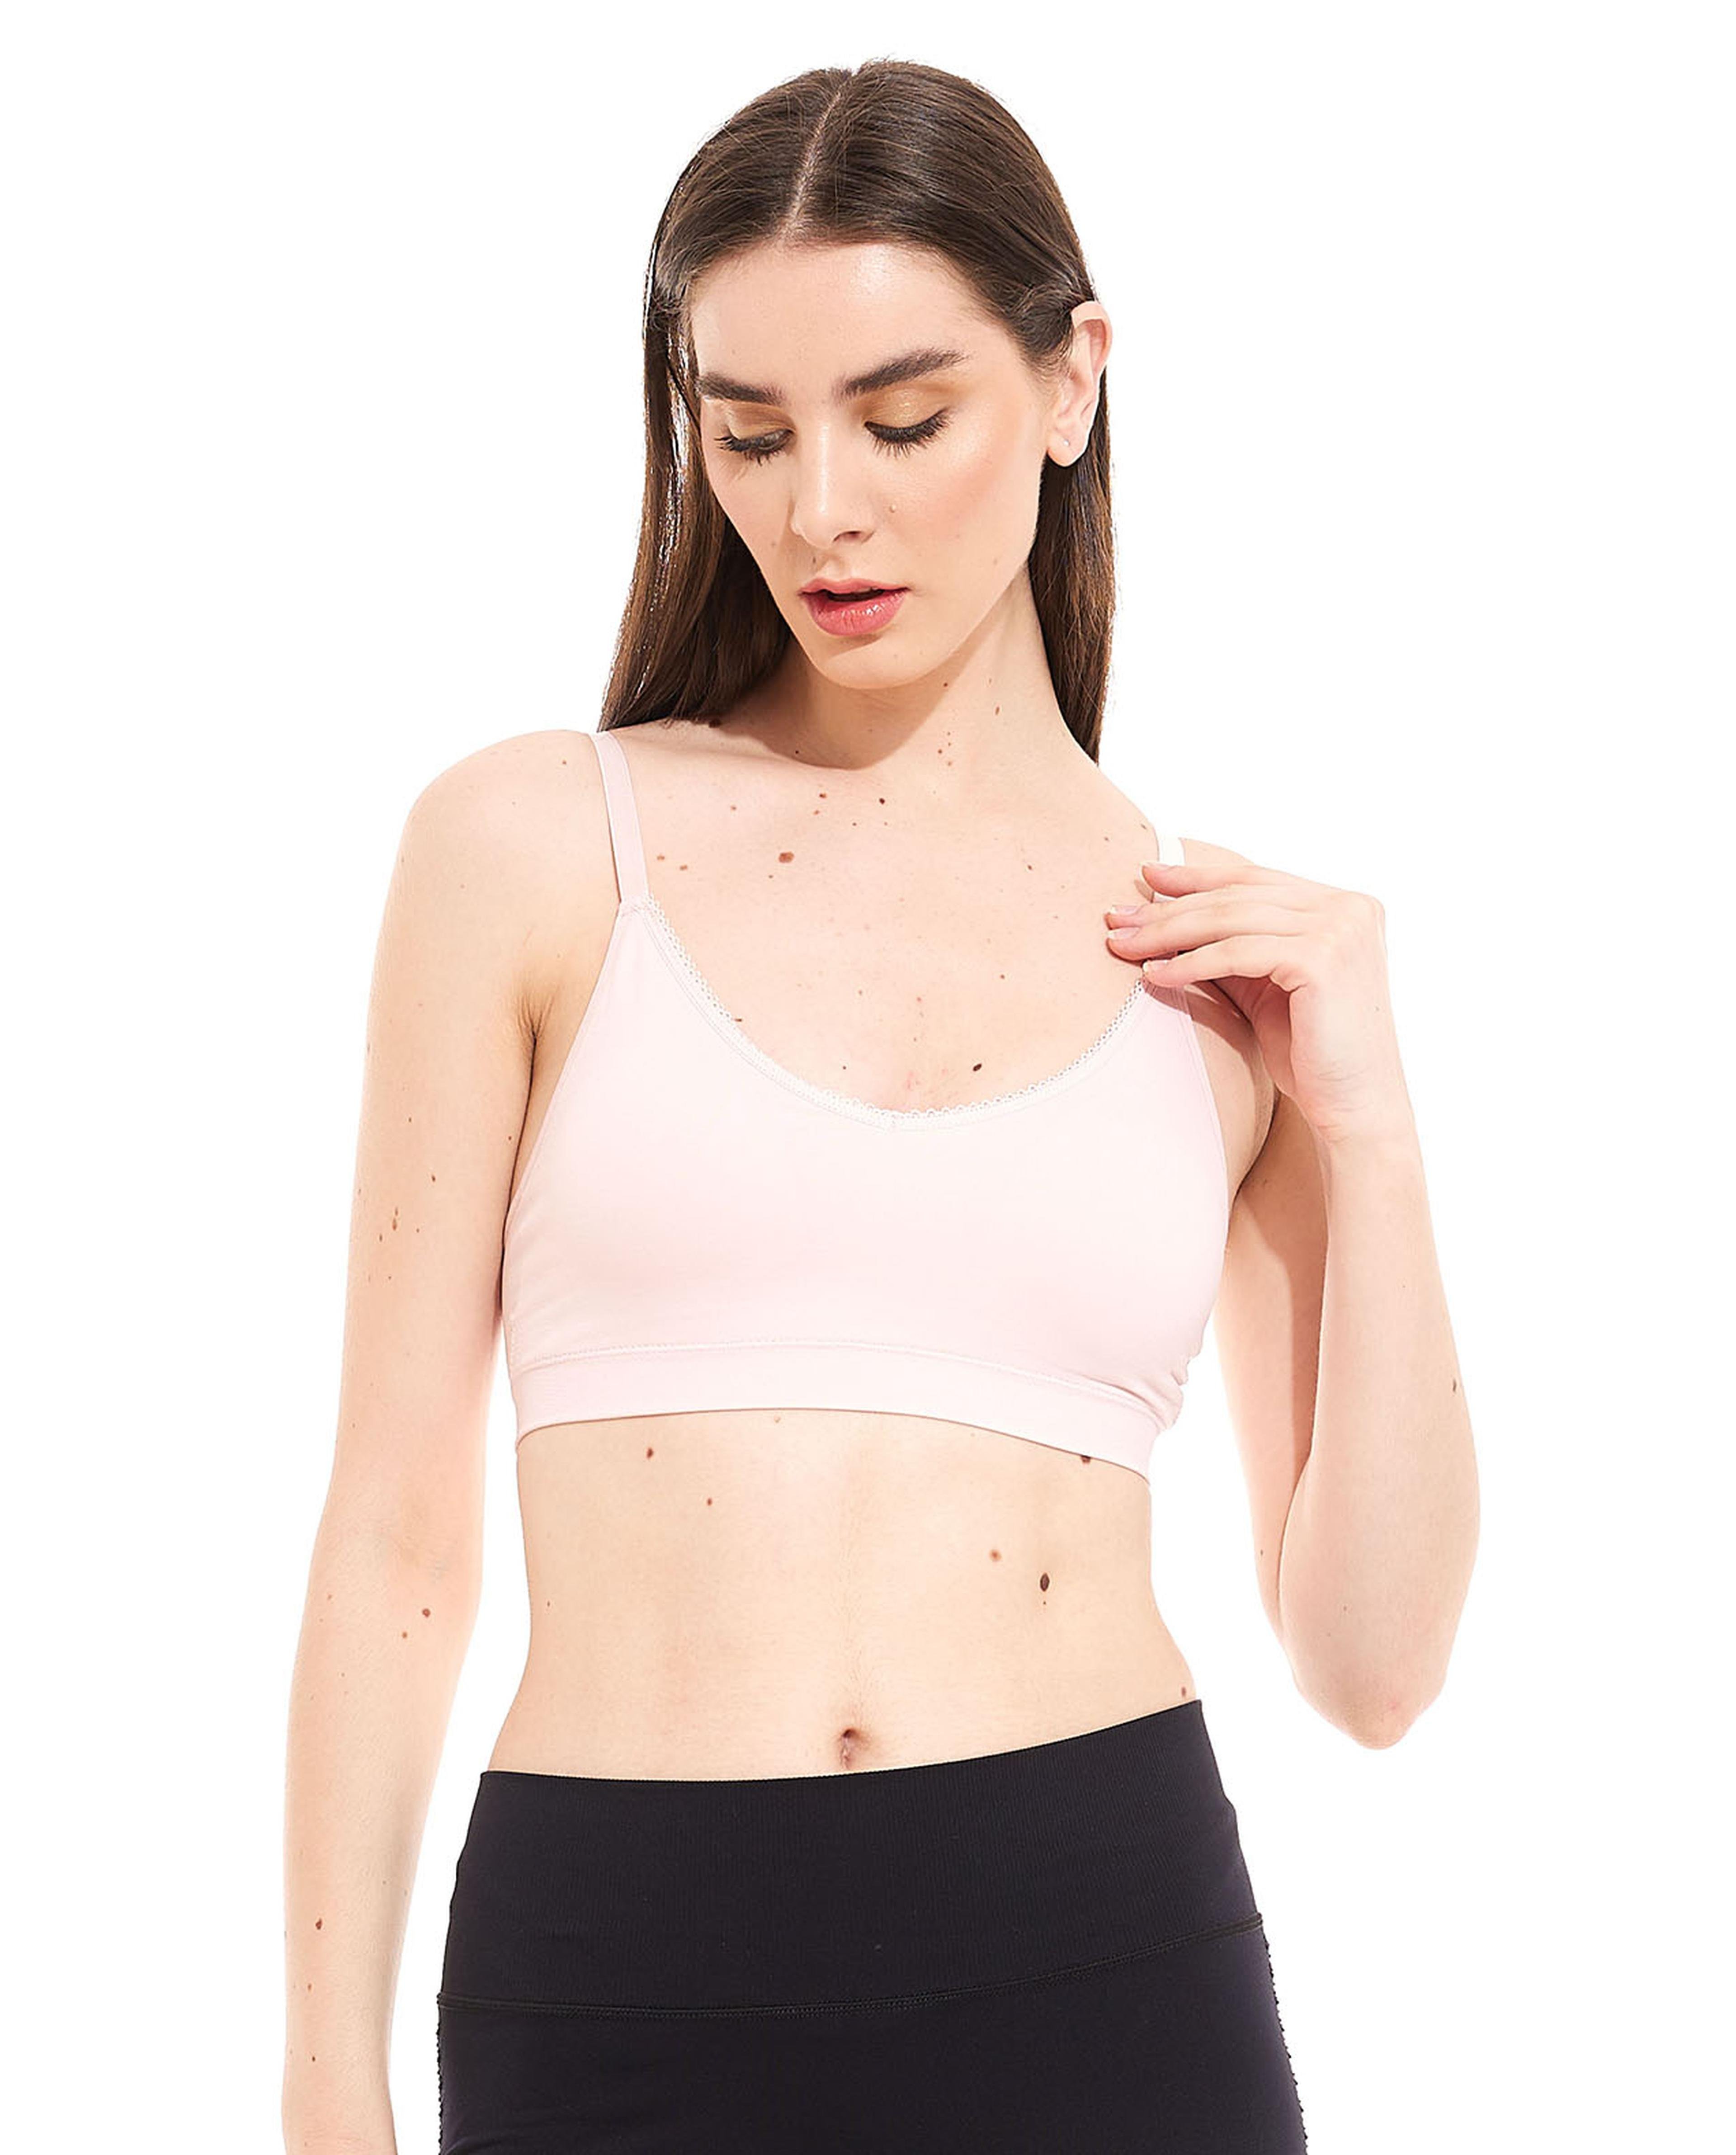 Pack of 2 Solid Sports Bras